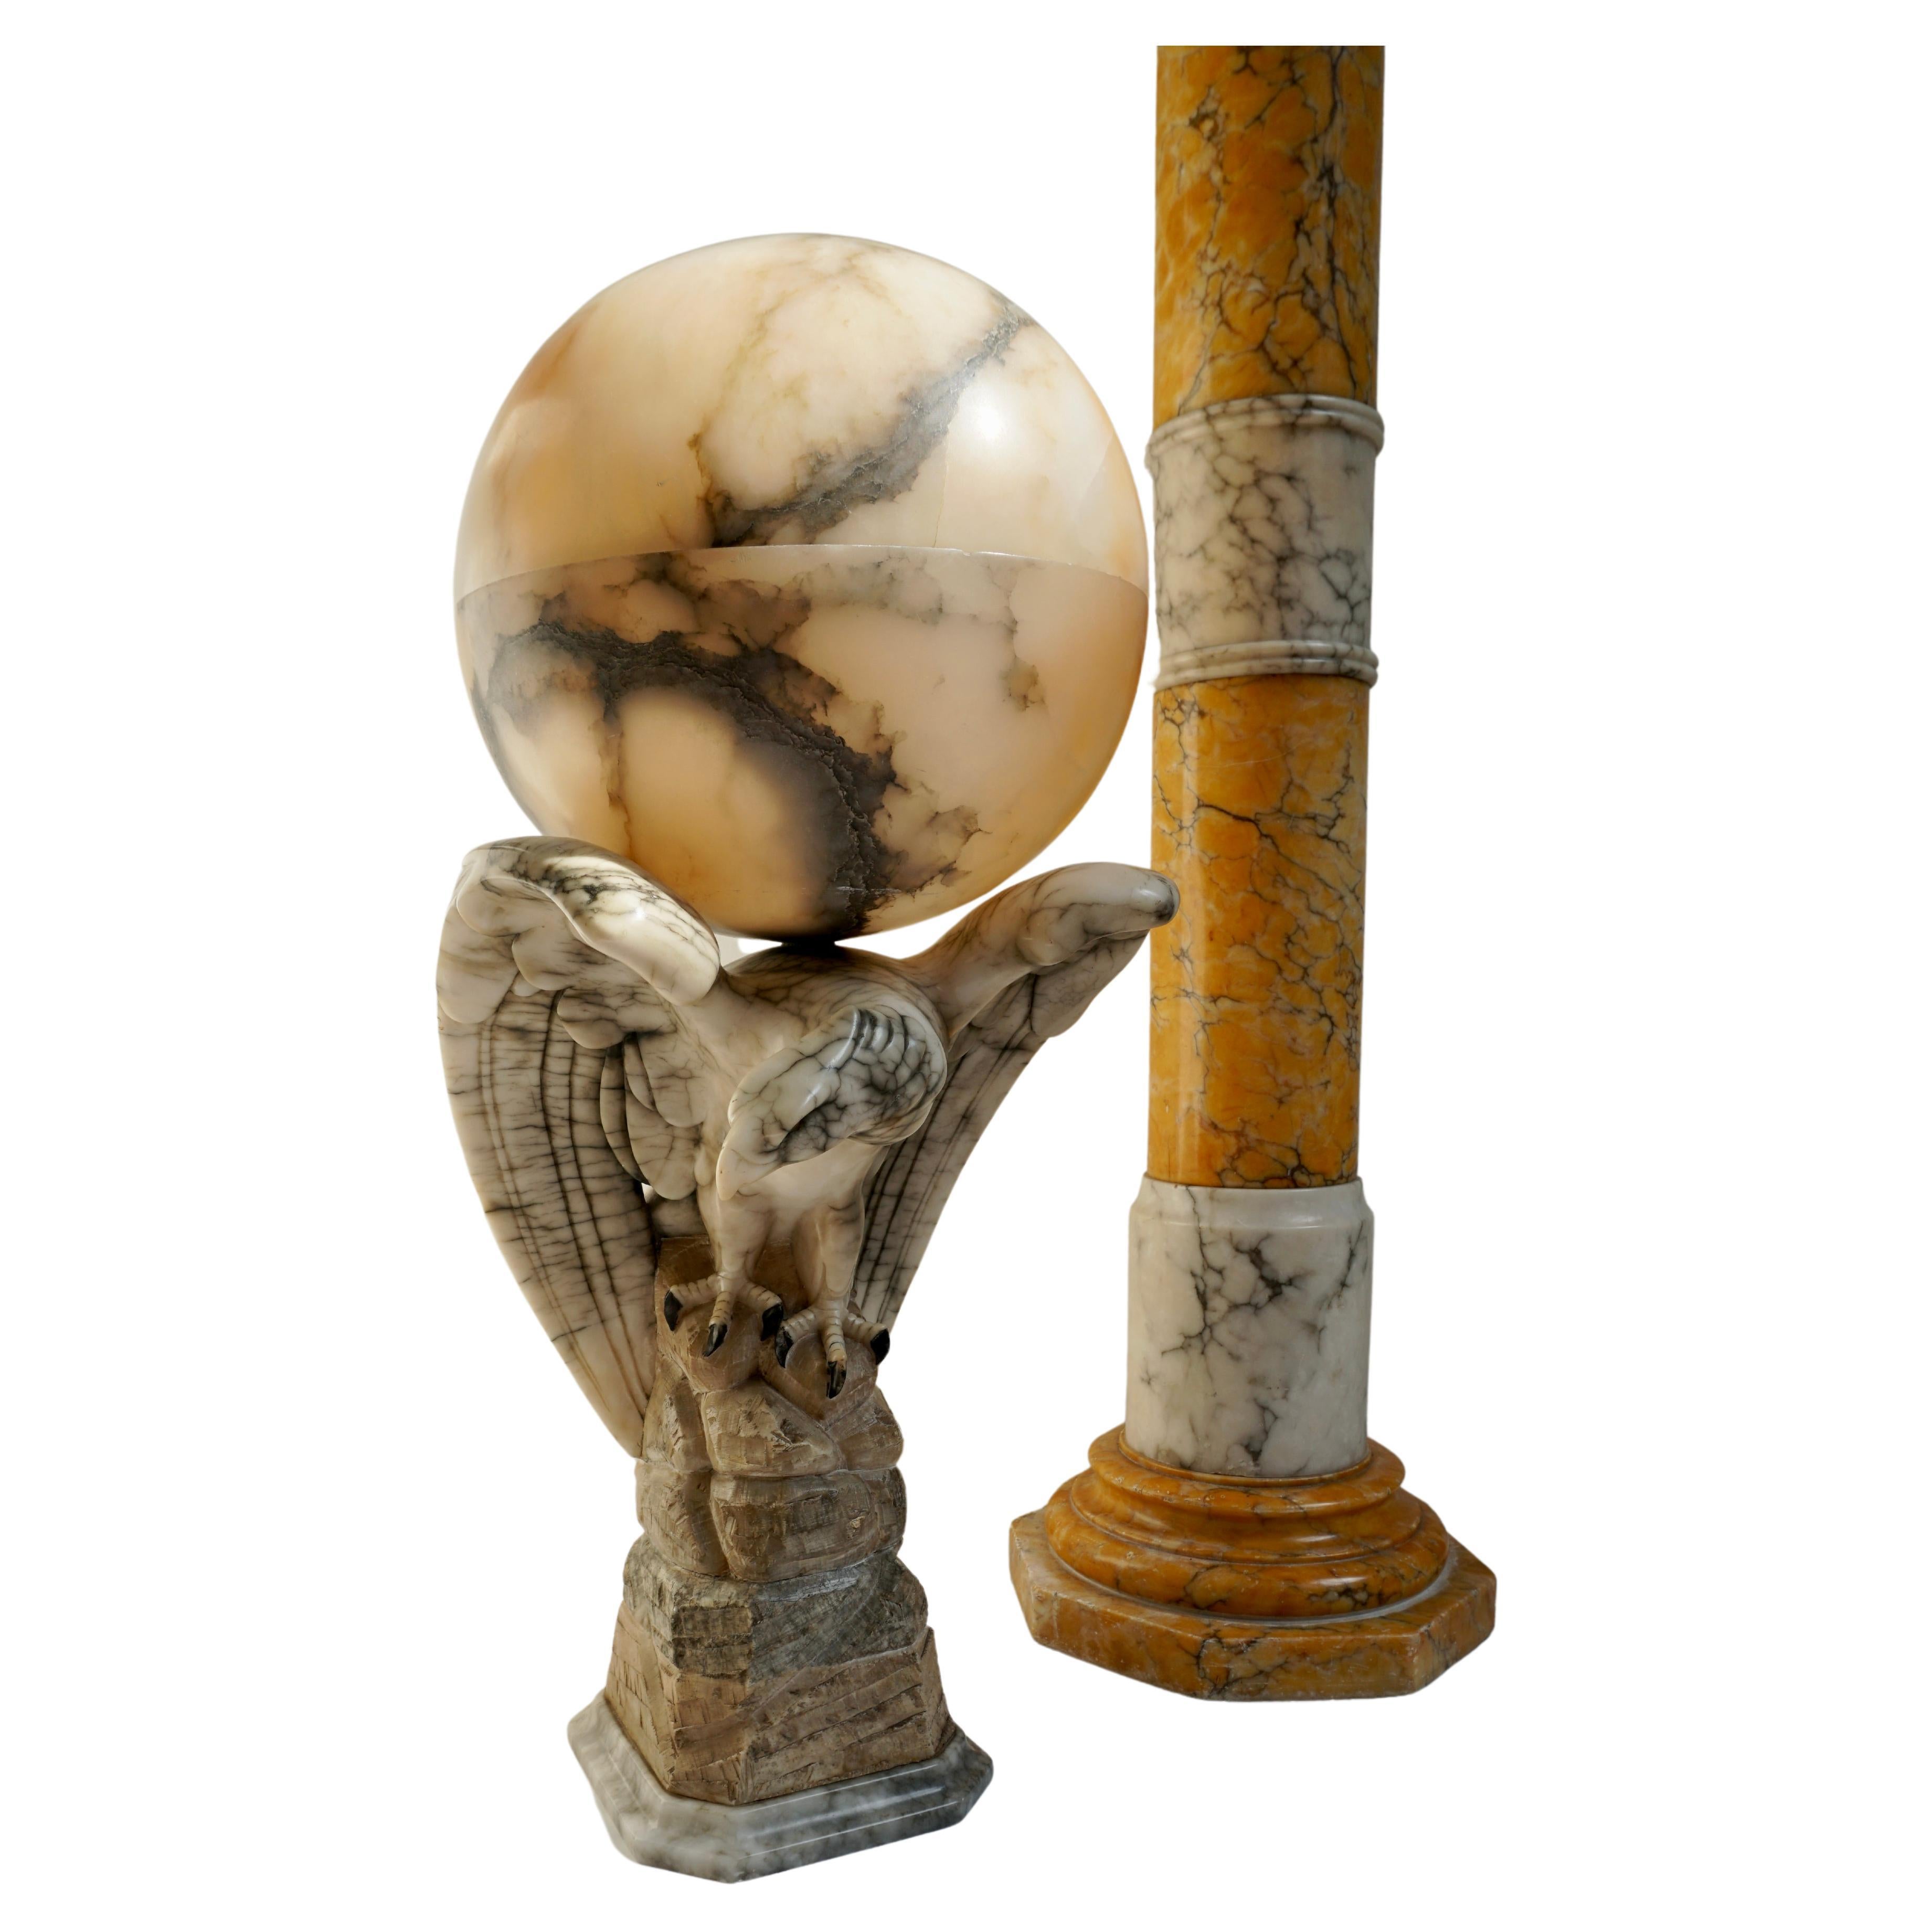 Highly decorative and quality carved, winged eagle table lamp on a column.

All handcrafted out of natural materials, this rare eagle table lamp is a marvelous work of art in the daytime and a stunning and spherical light fixture in the evenings.The